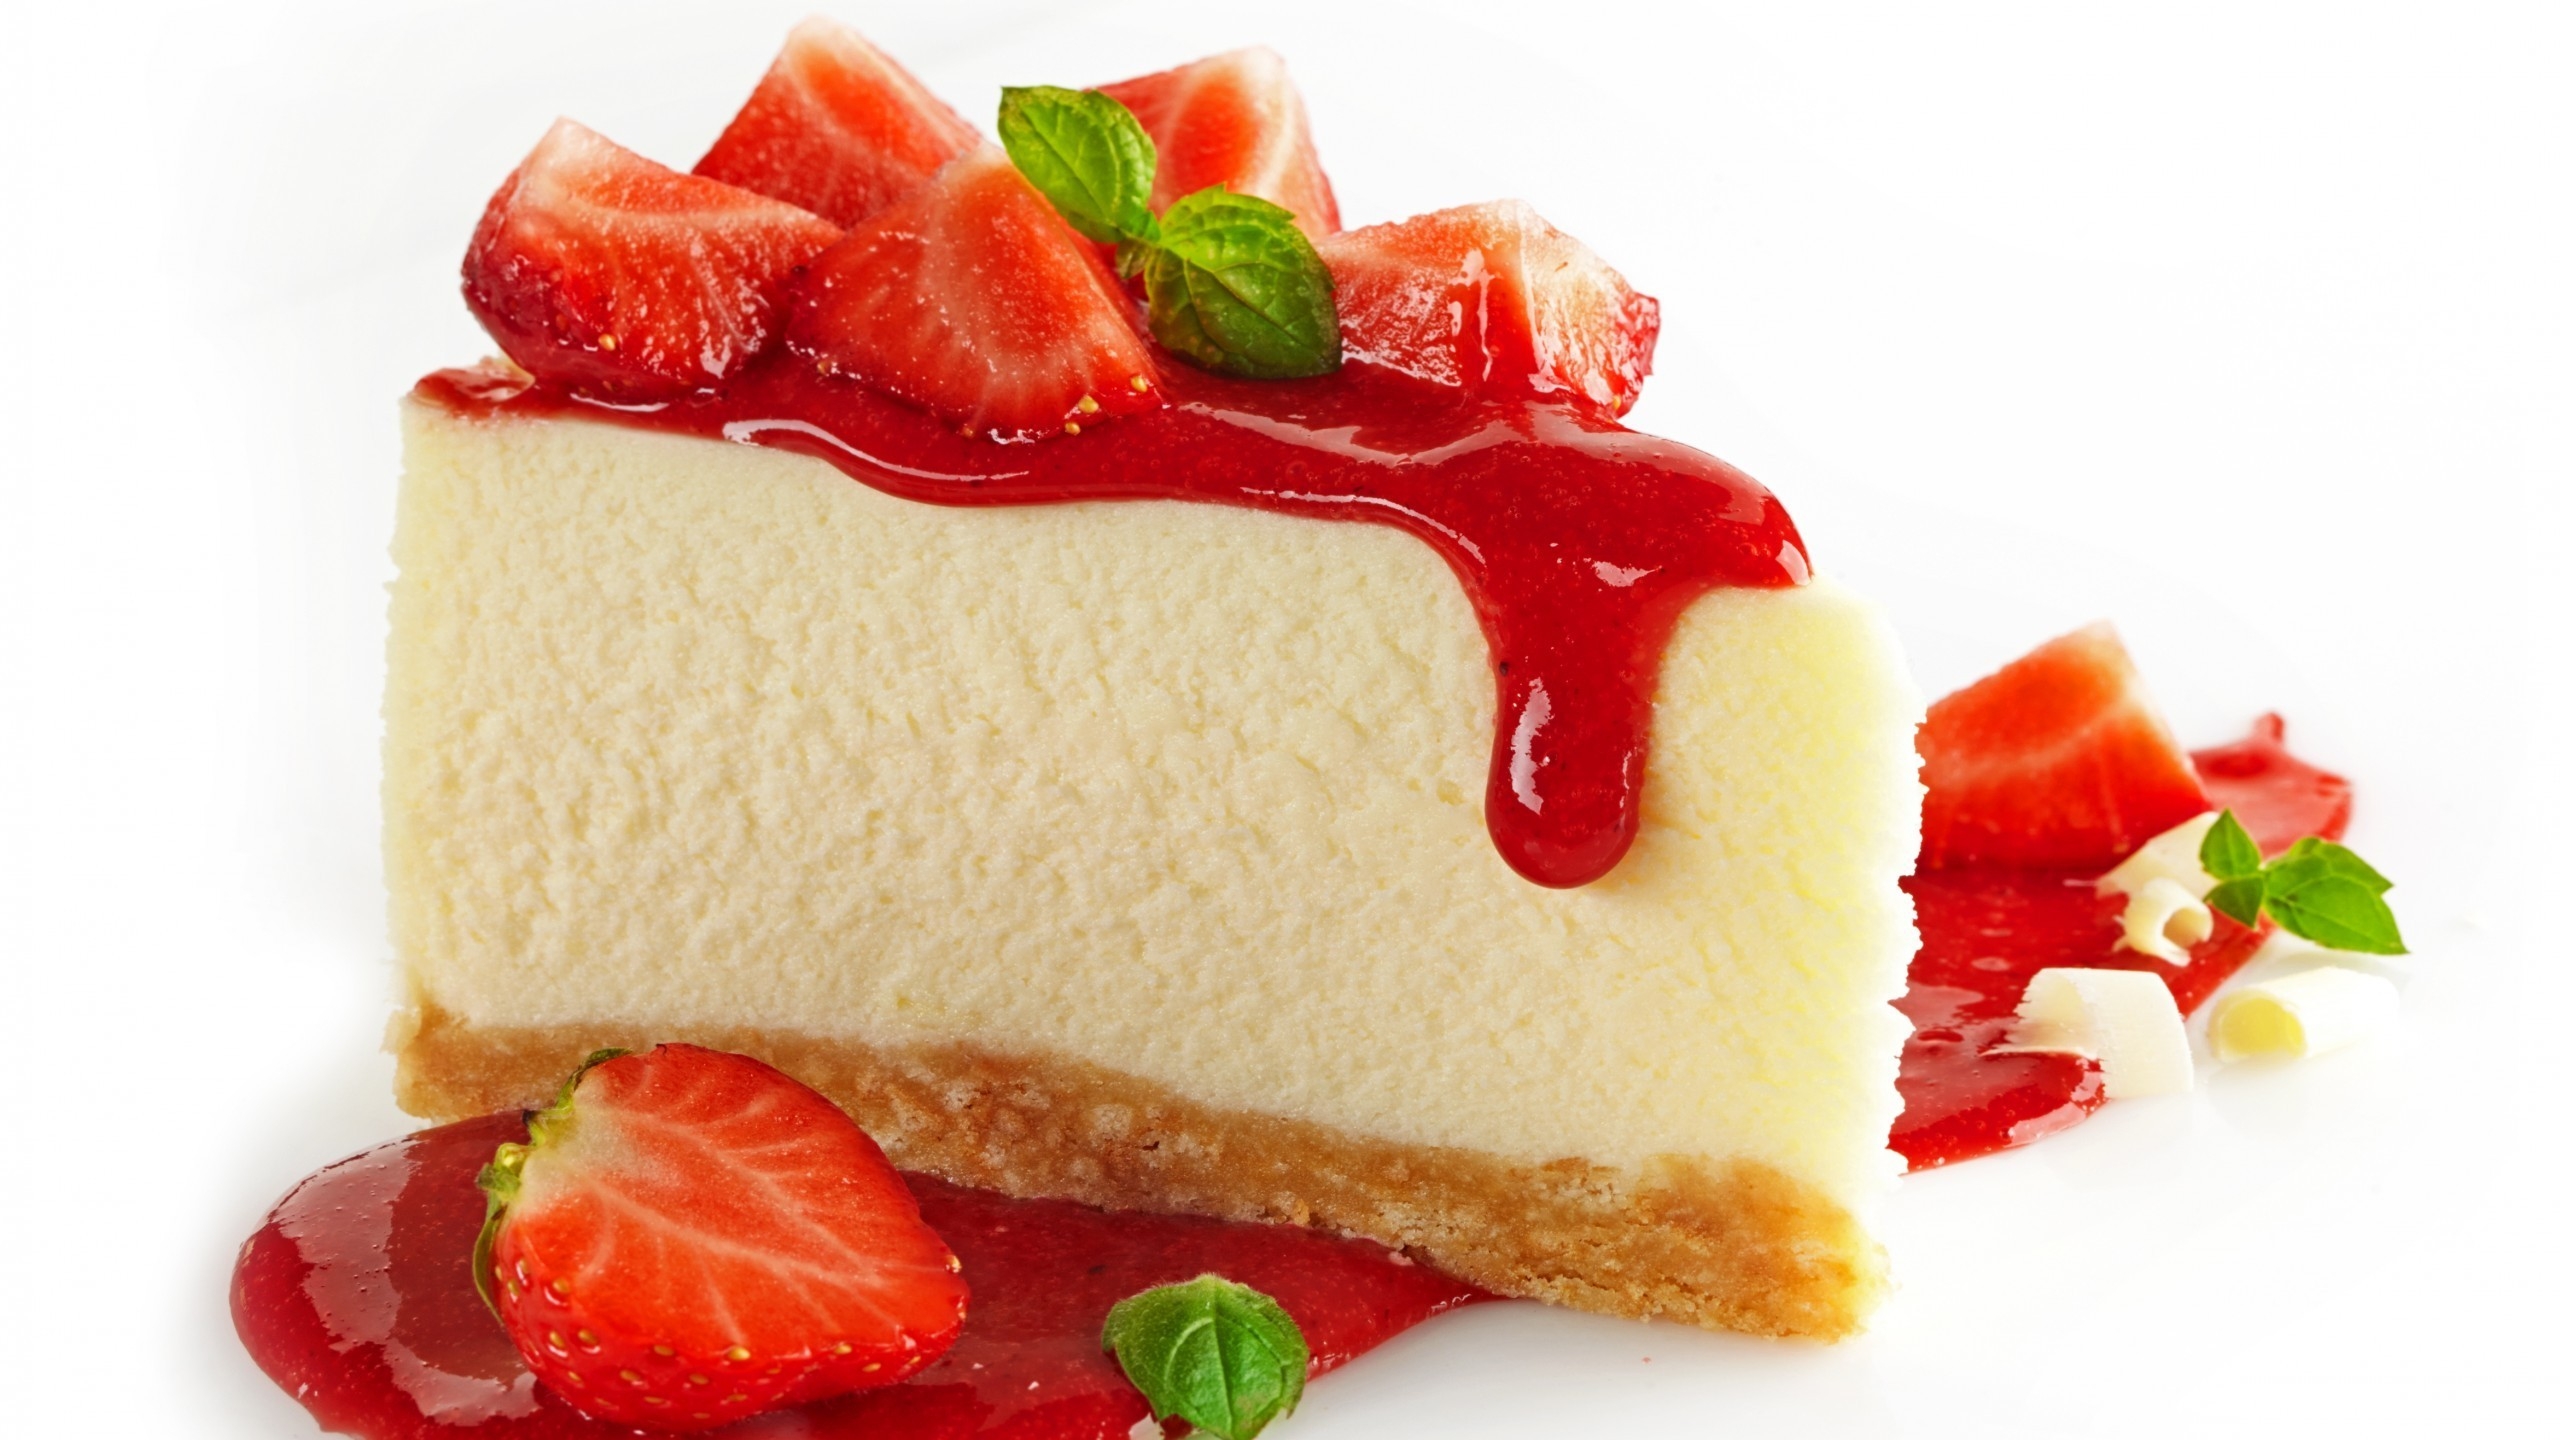 Strawberry Cheesecake  for 2560x1440 HDTV resolution